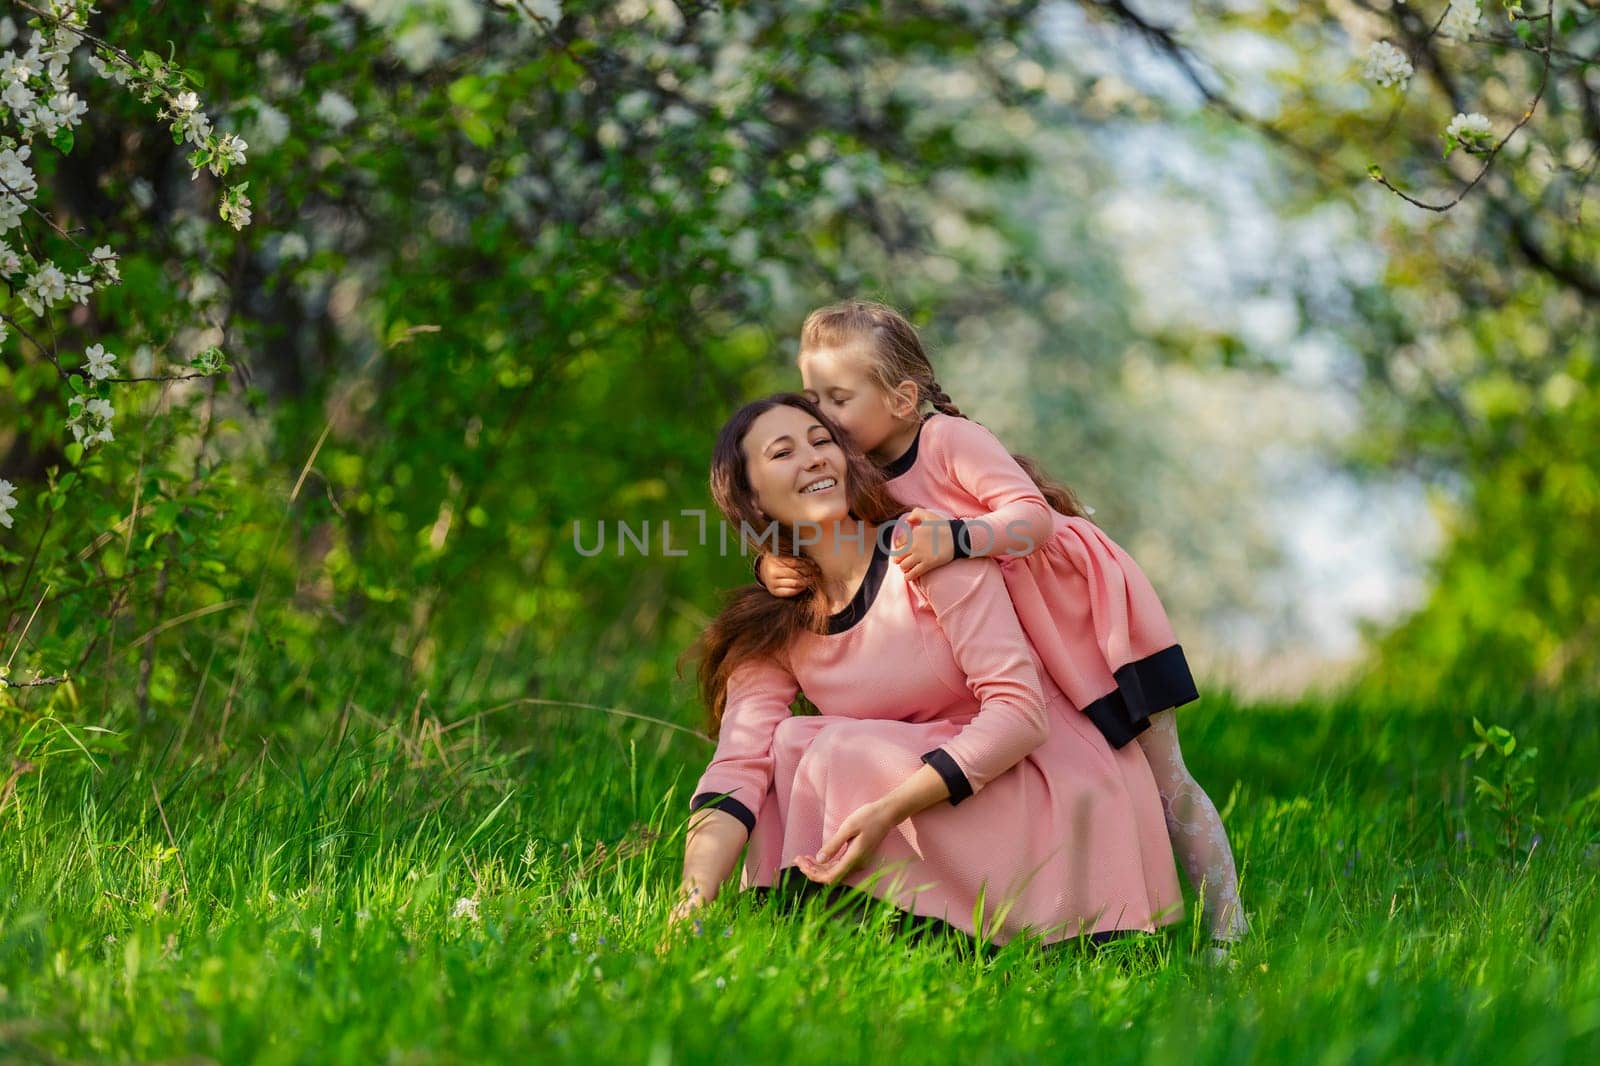 mother and daughter in nature in identical dresses